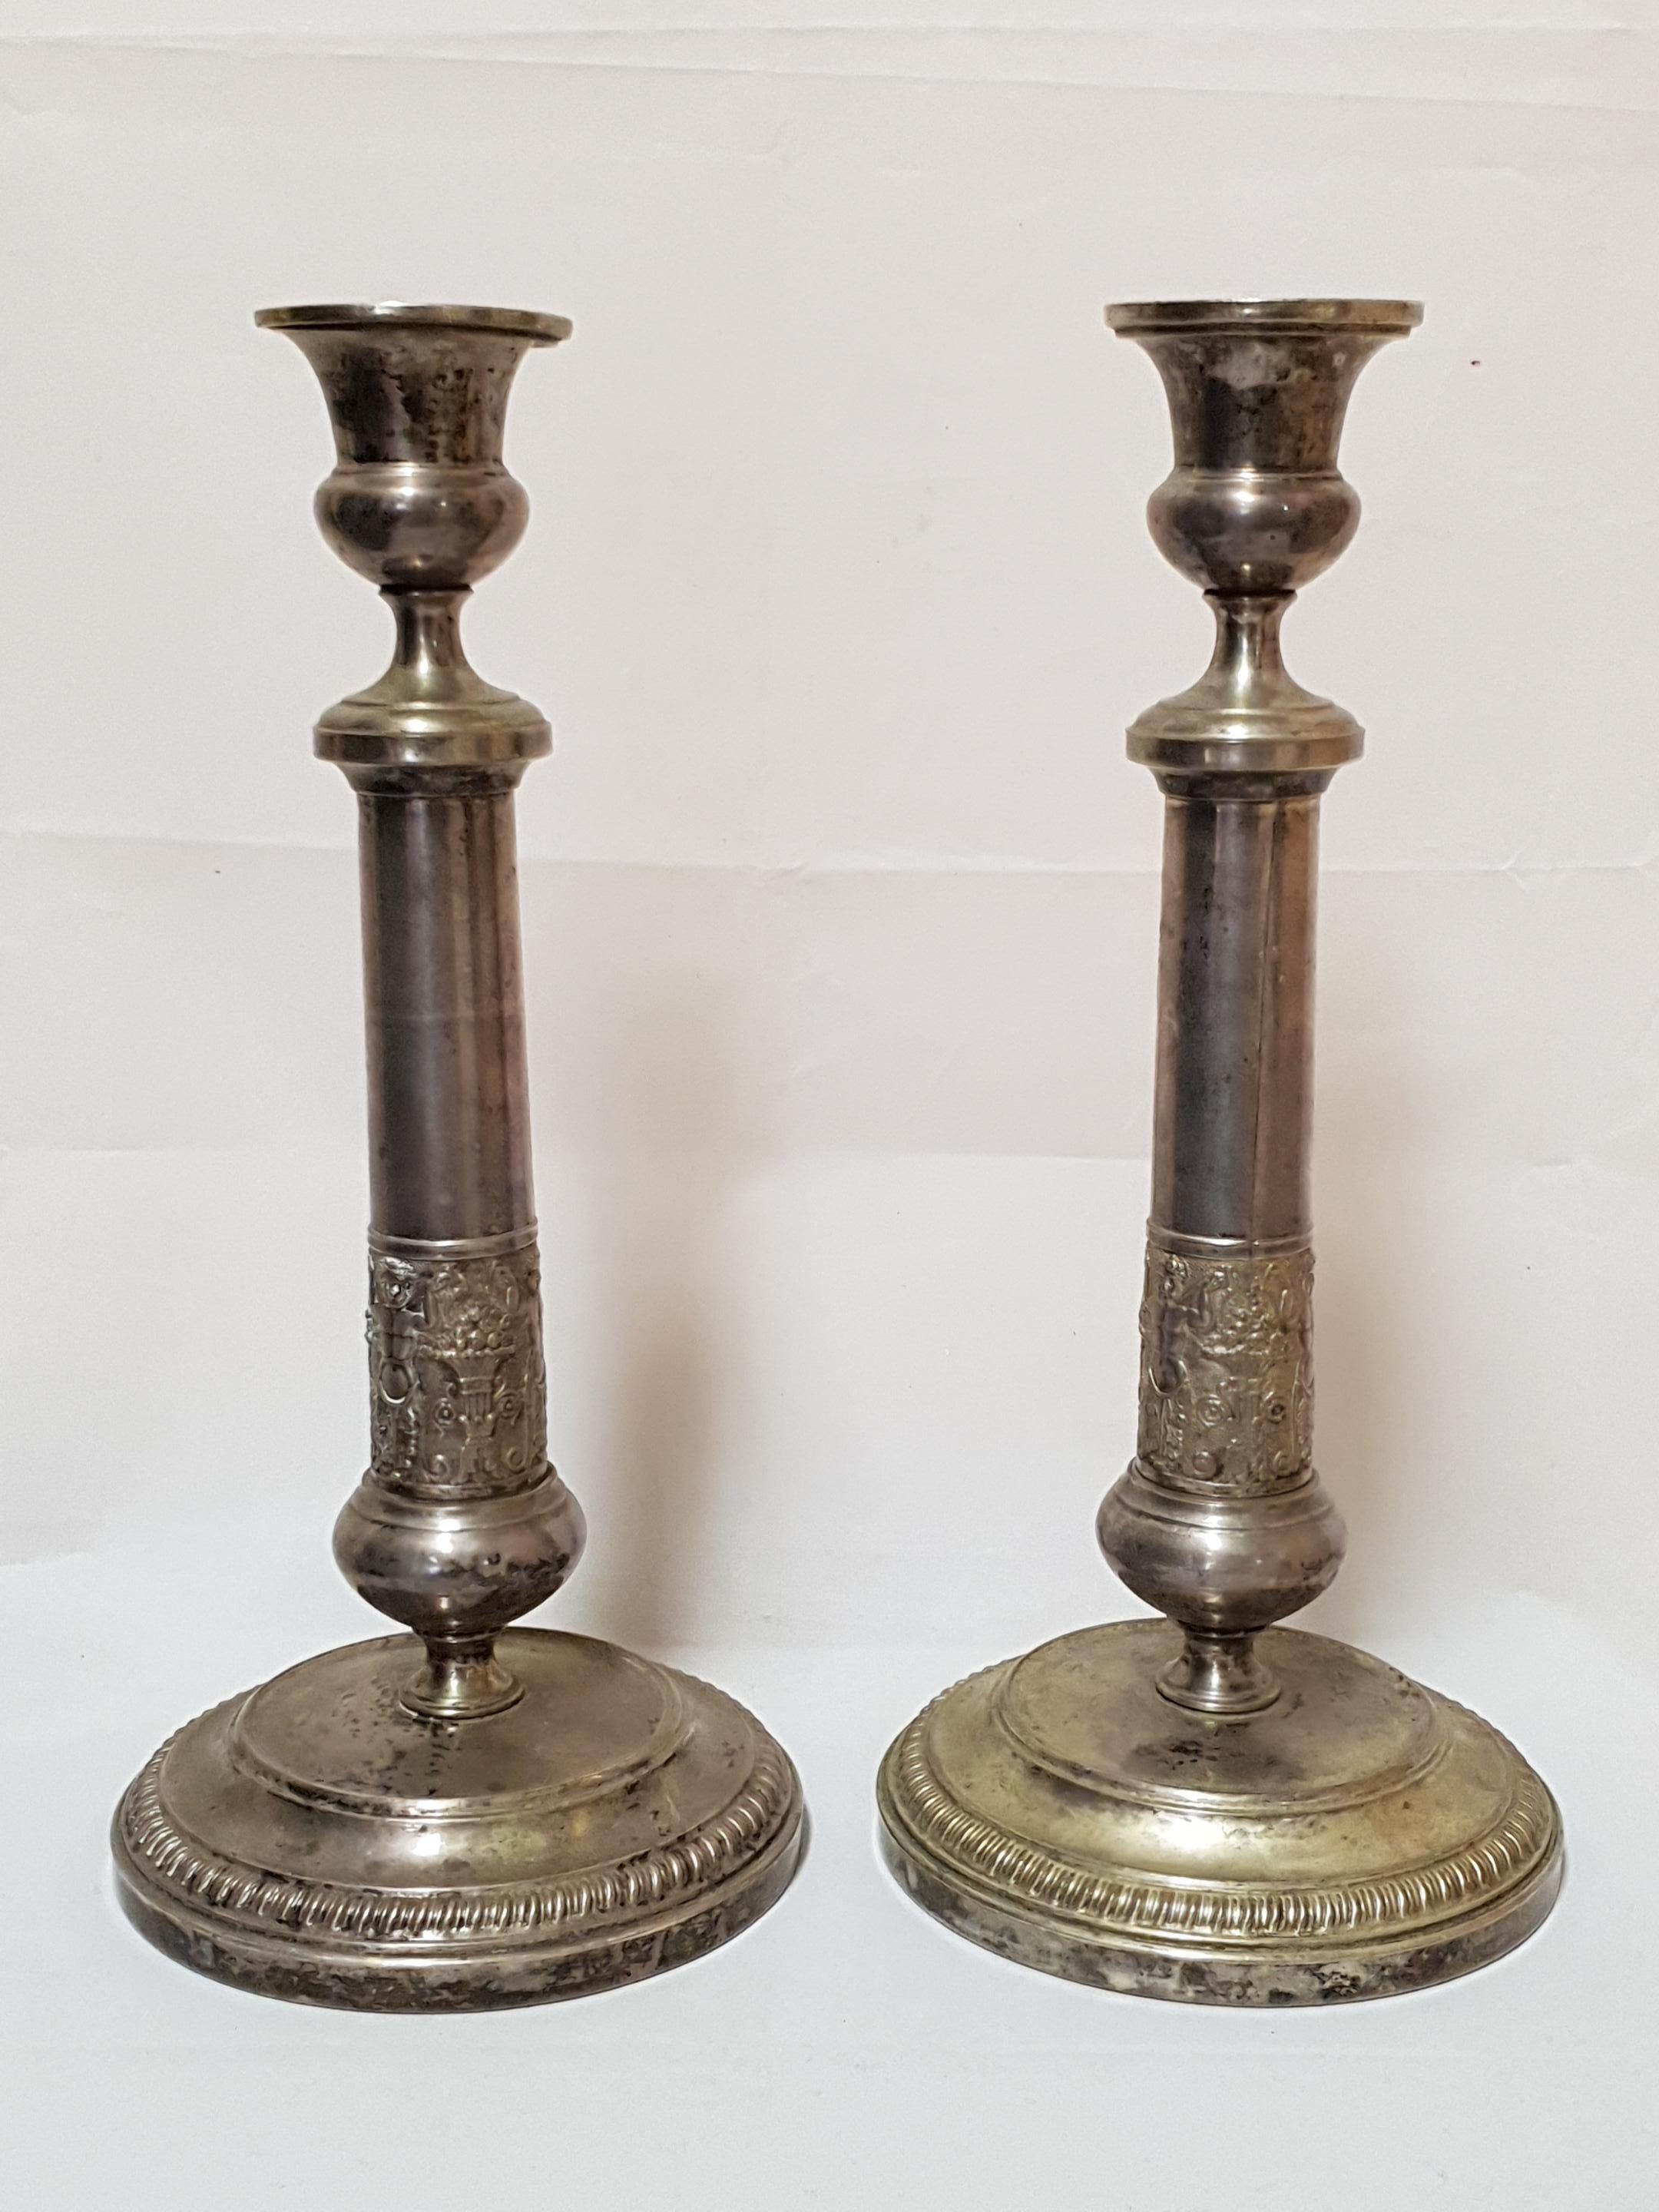 Pair of neoclassical silver plated candlesticks
Marked under the base.